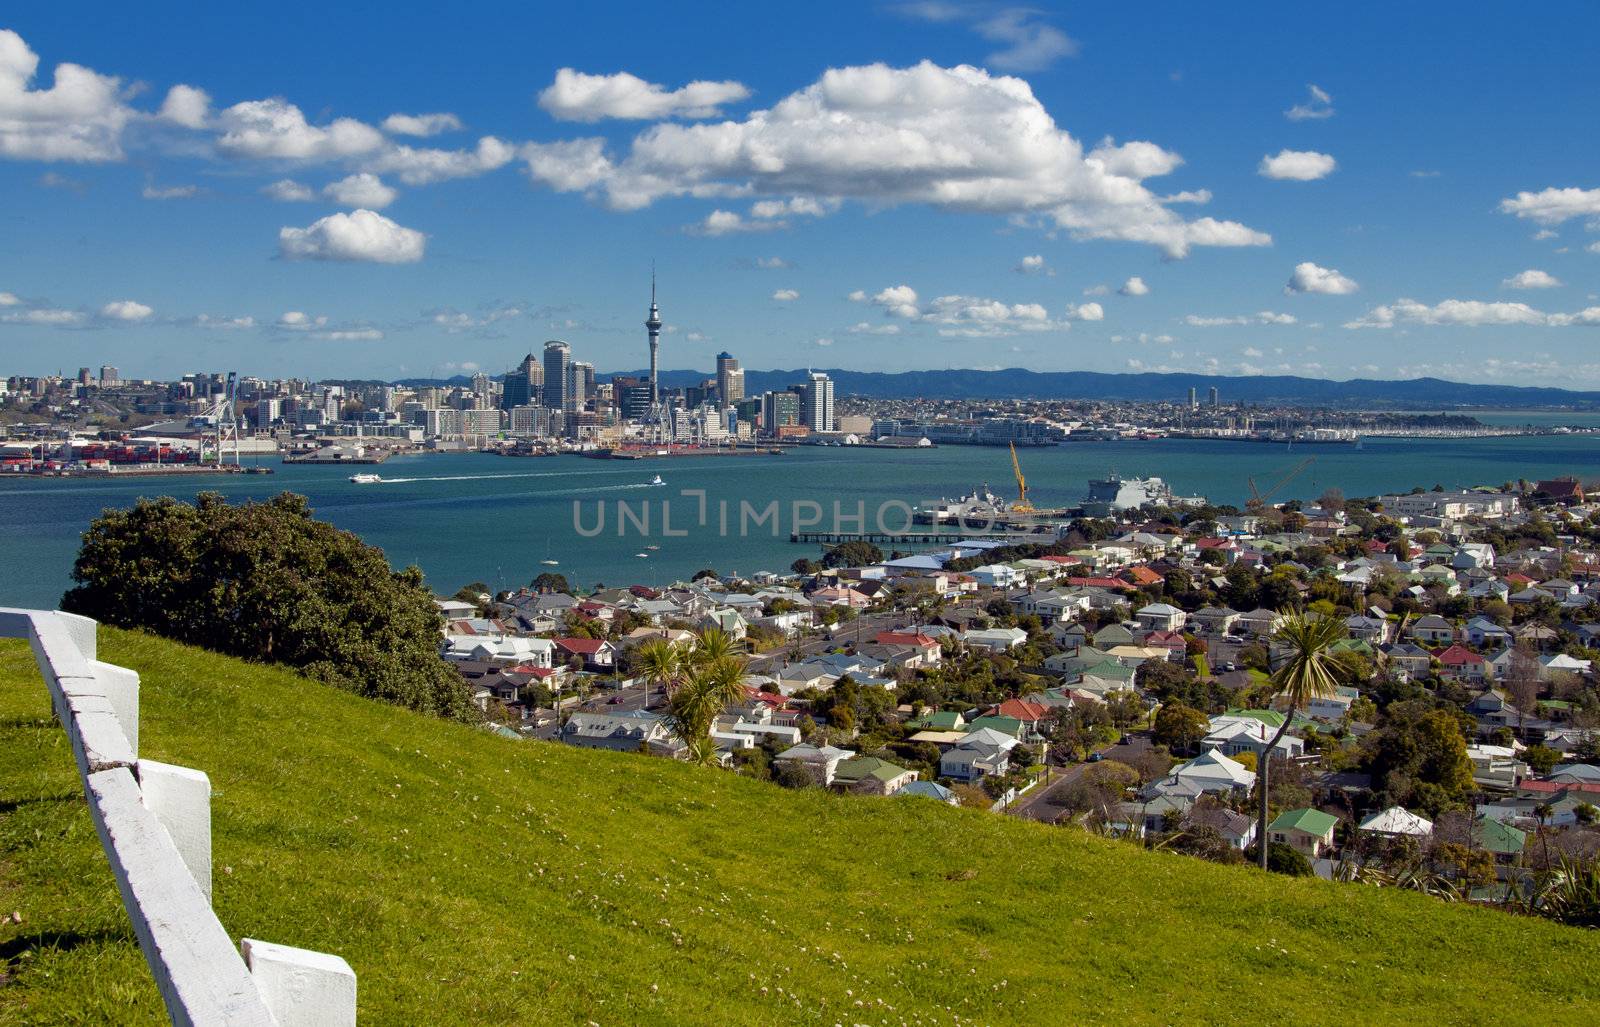 Auckland City by urmoments